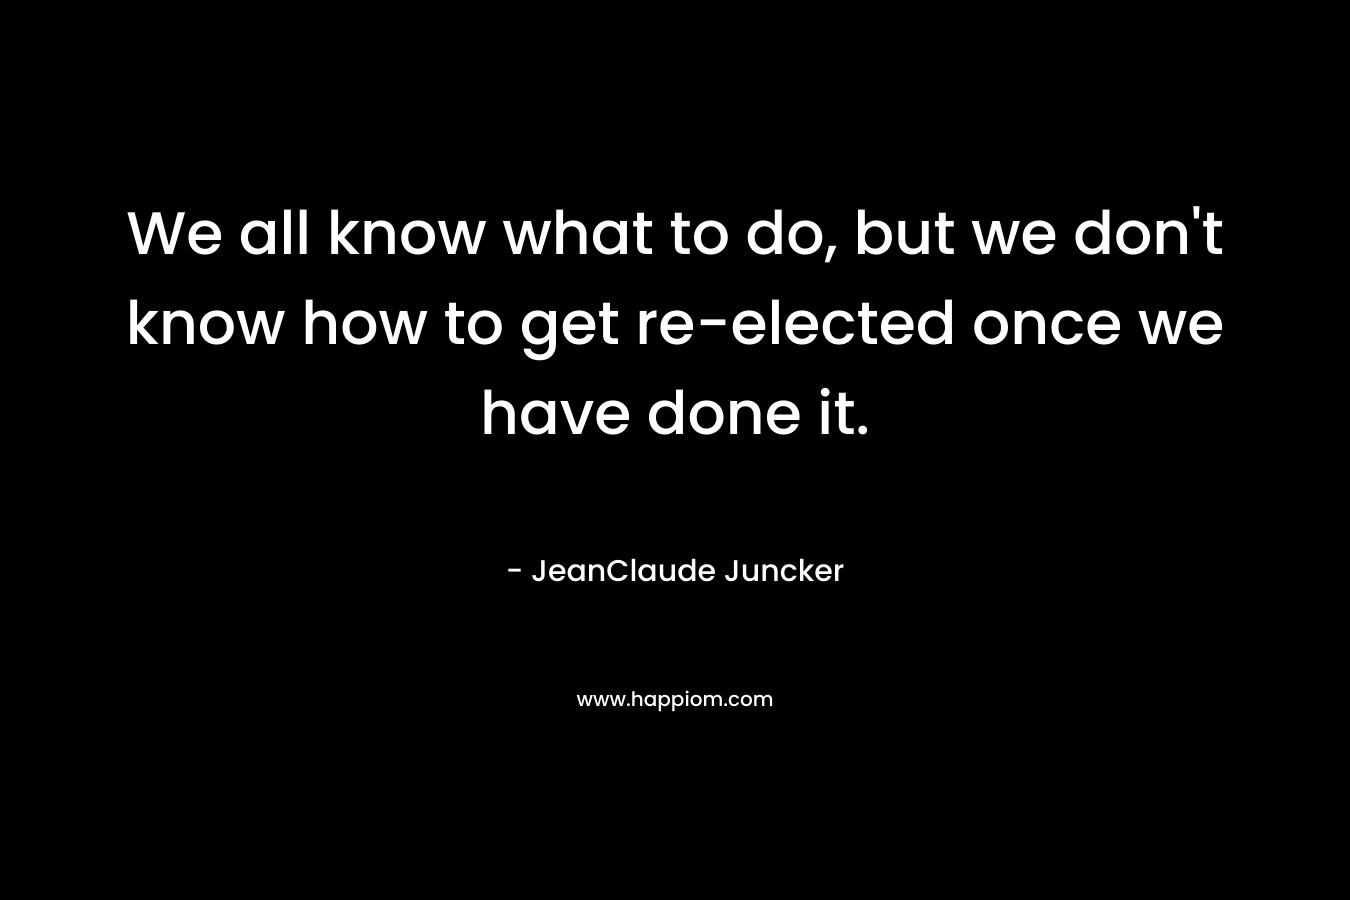 We all know what to do, but we don’t know how to get re-elected once we have done it. – JeanClaude Juncker